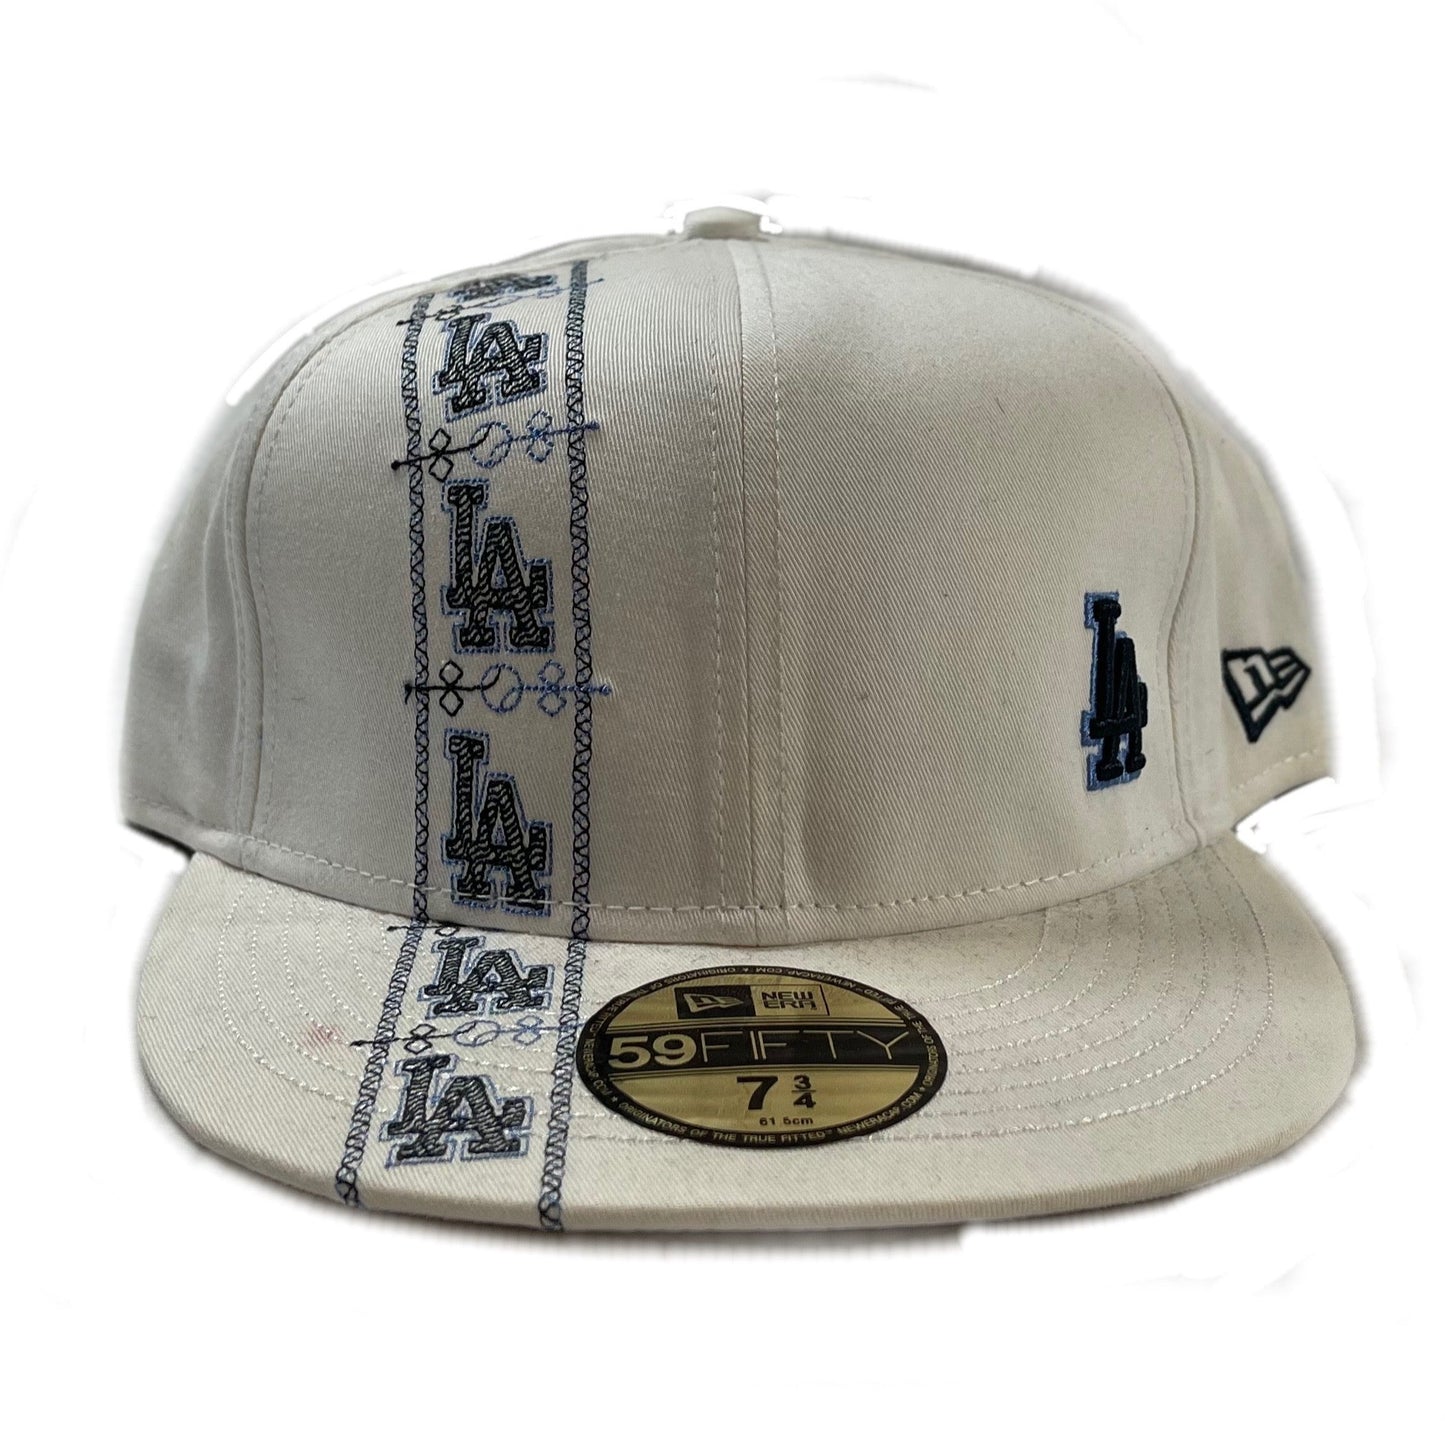 Los Angeles Dodgers Roll (White) Fitted